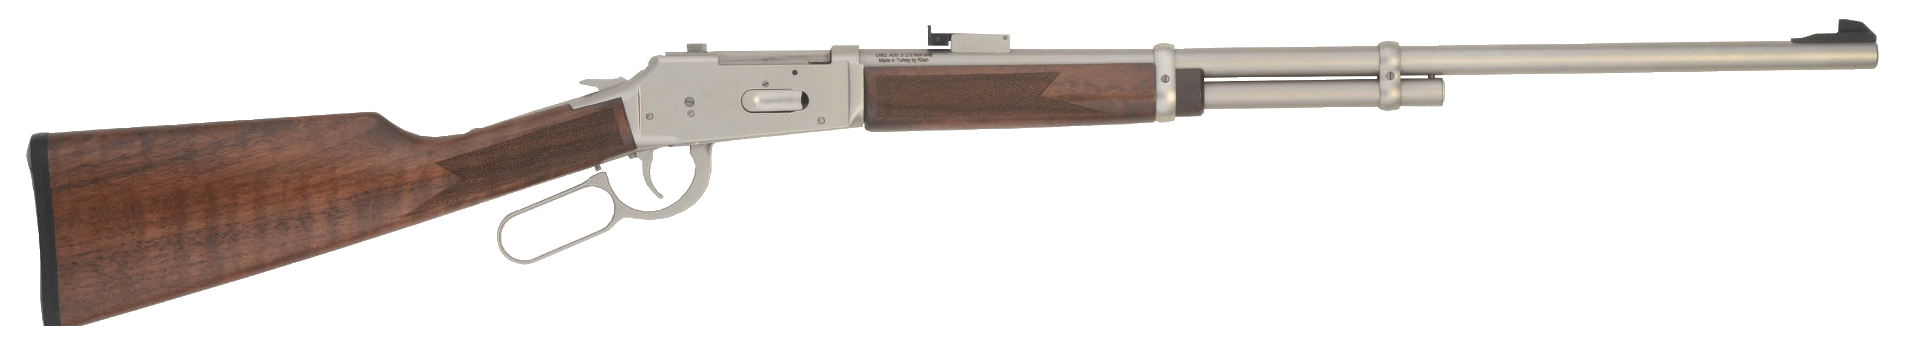 Slay Clays, Birds, and More with TriStar's NEW LR94 Lever Action 410